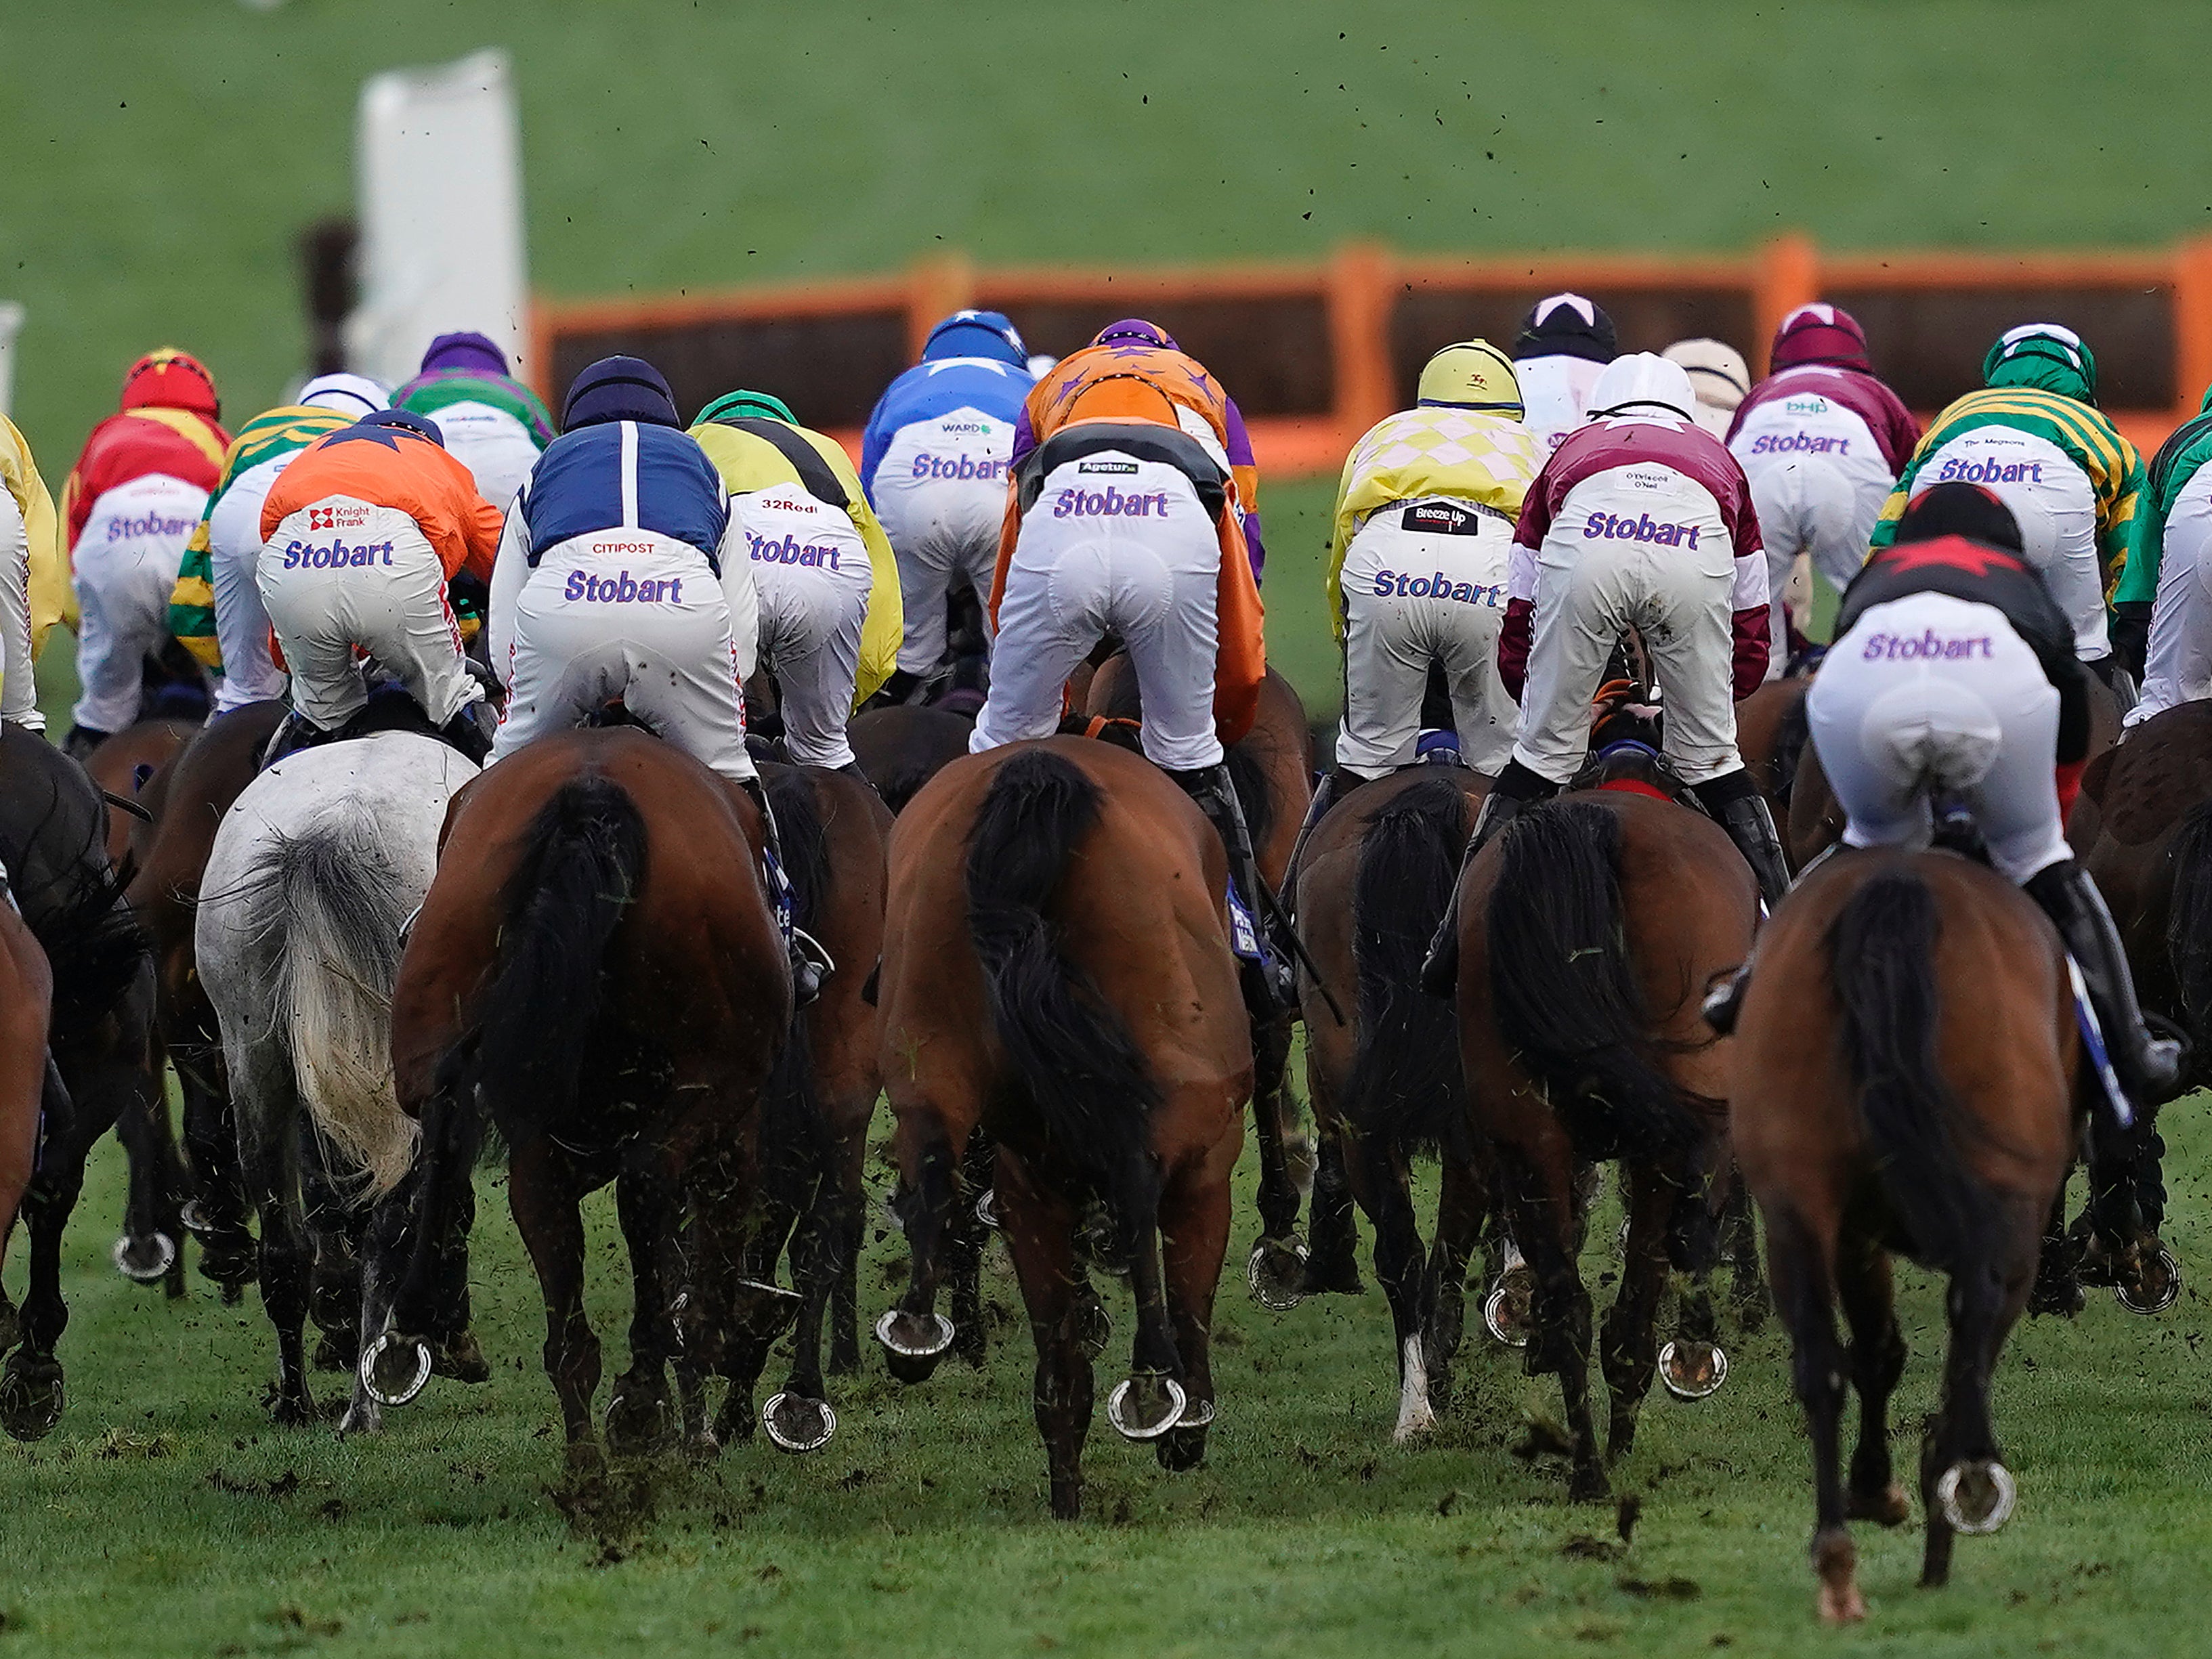 Four days of racing will be held at Cheltenham Festival this week